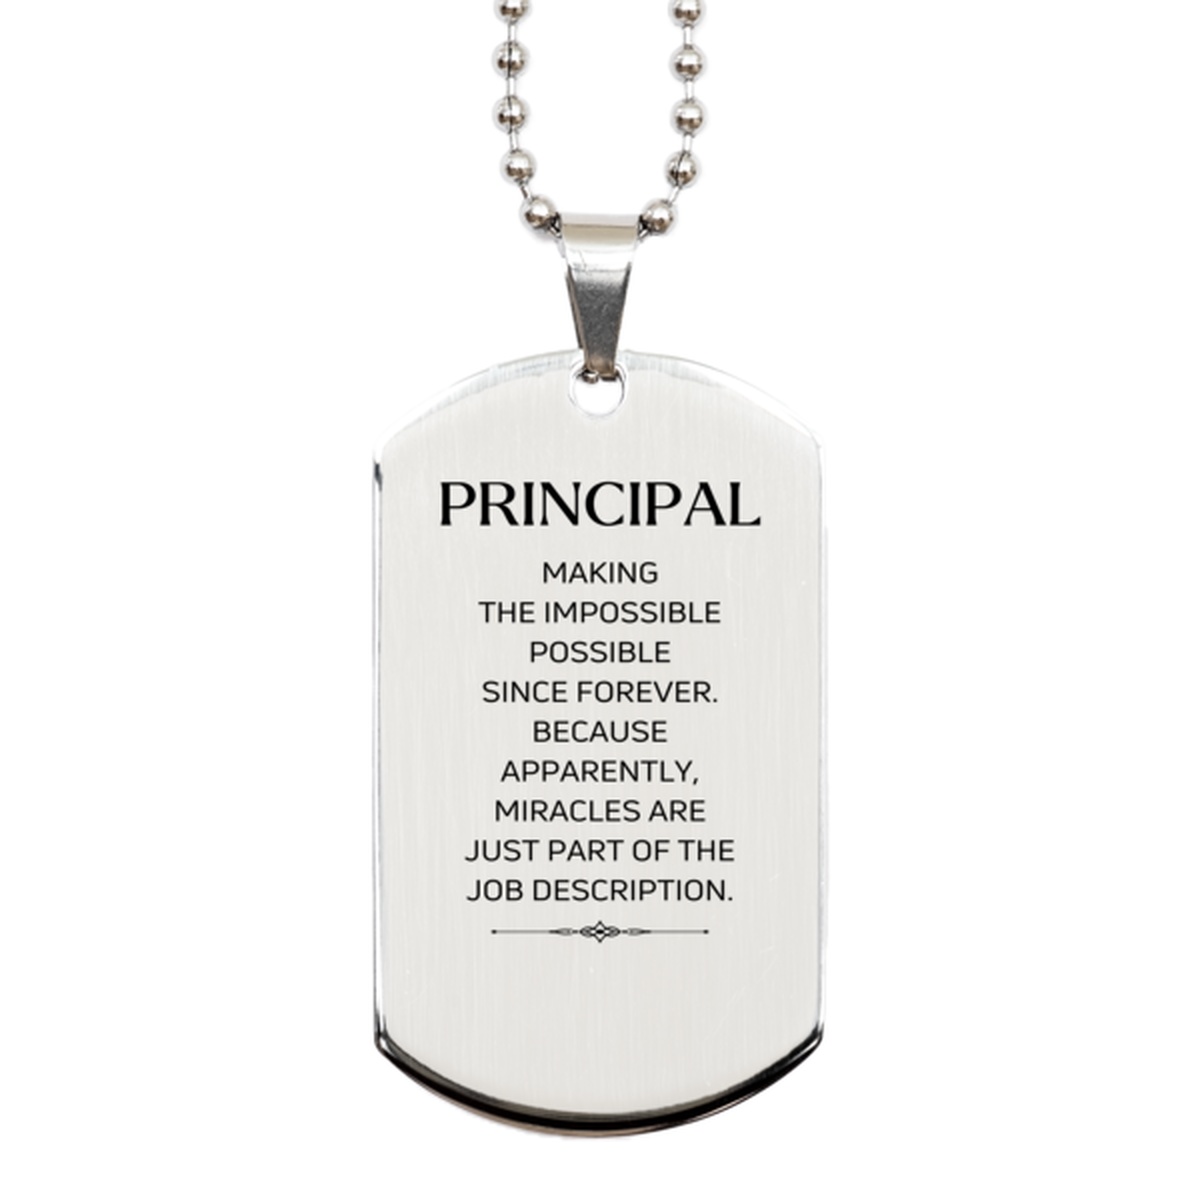 Funny Principal Gifts, Miracles are just part of the job description, Inspirational Birthday Silver Dog Tag For Principal, Men, Women, Coworkers, Friends, Boss